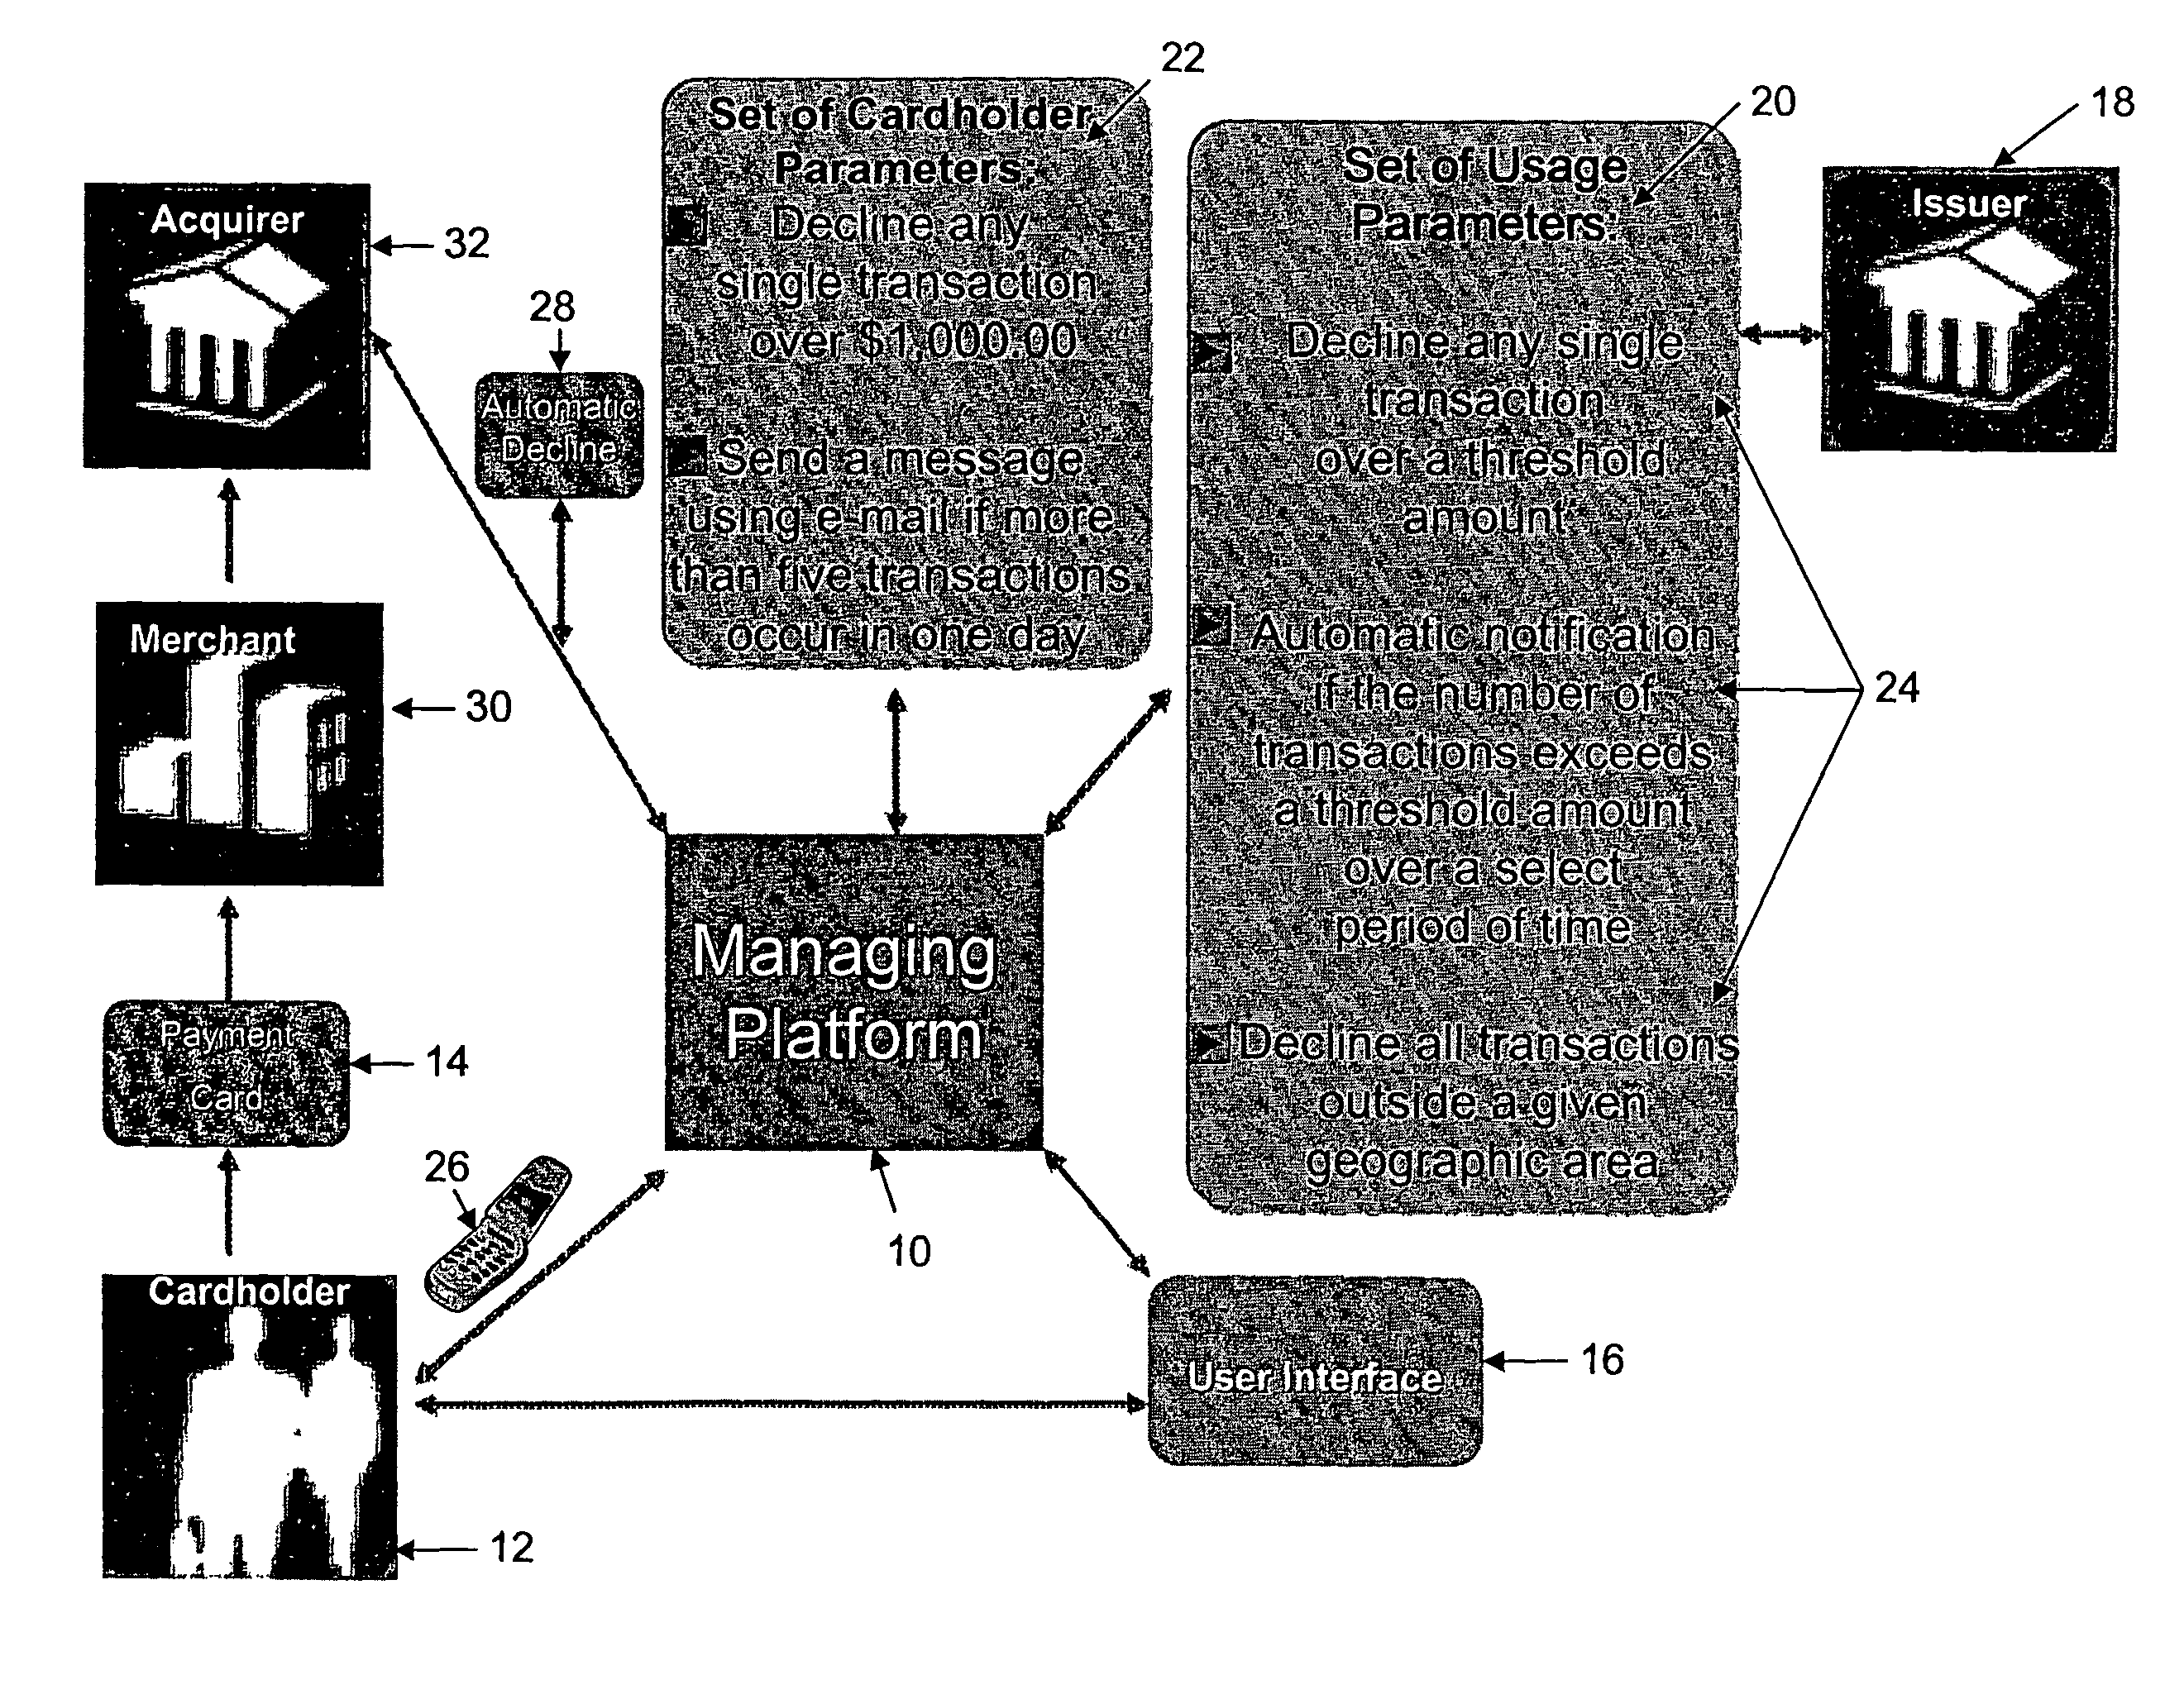 Method for a payment cardholder to control and manage the use of a payment card